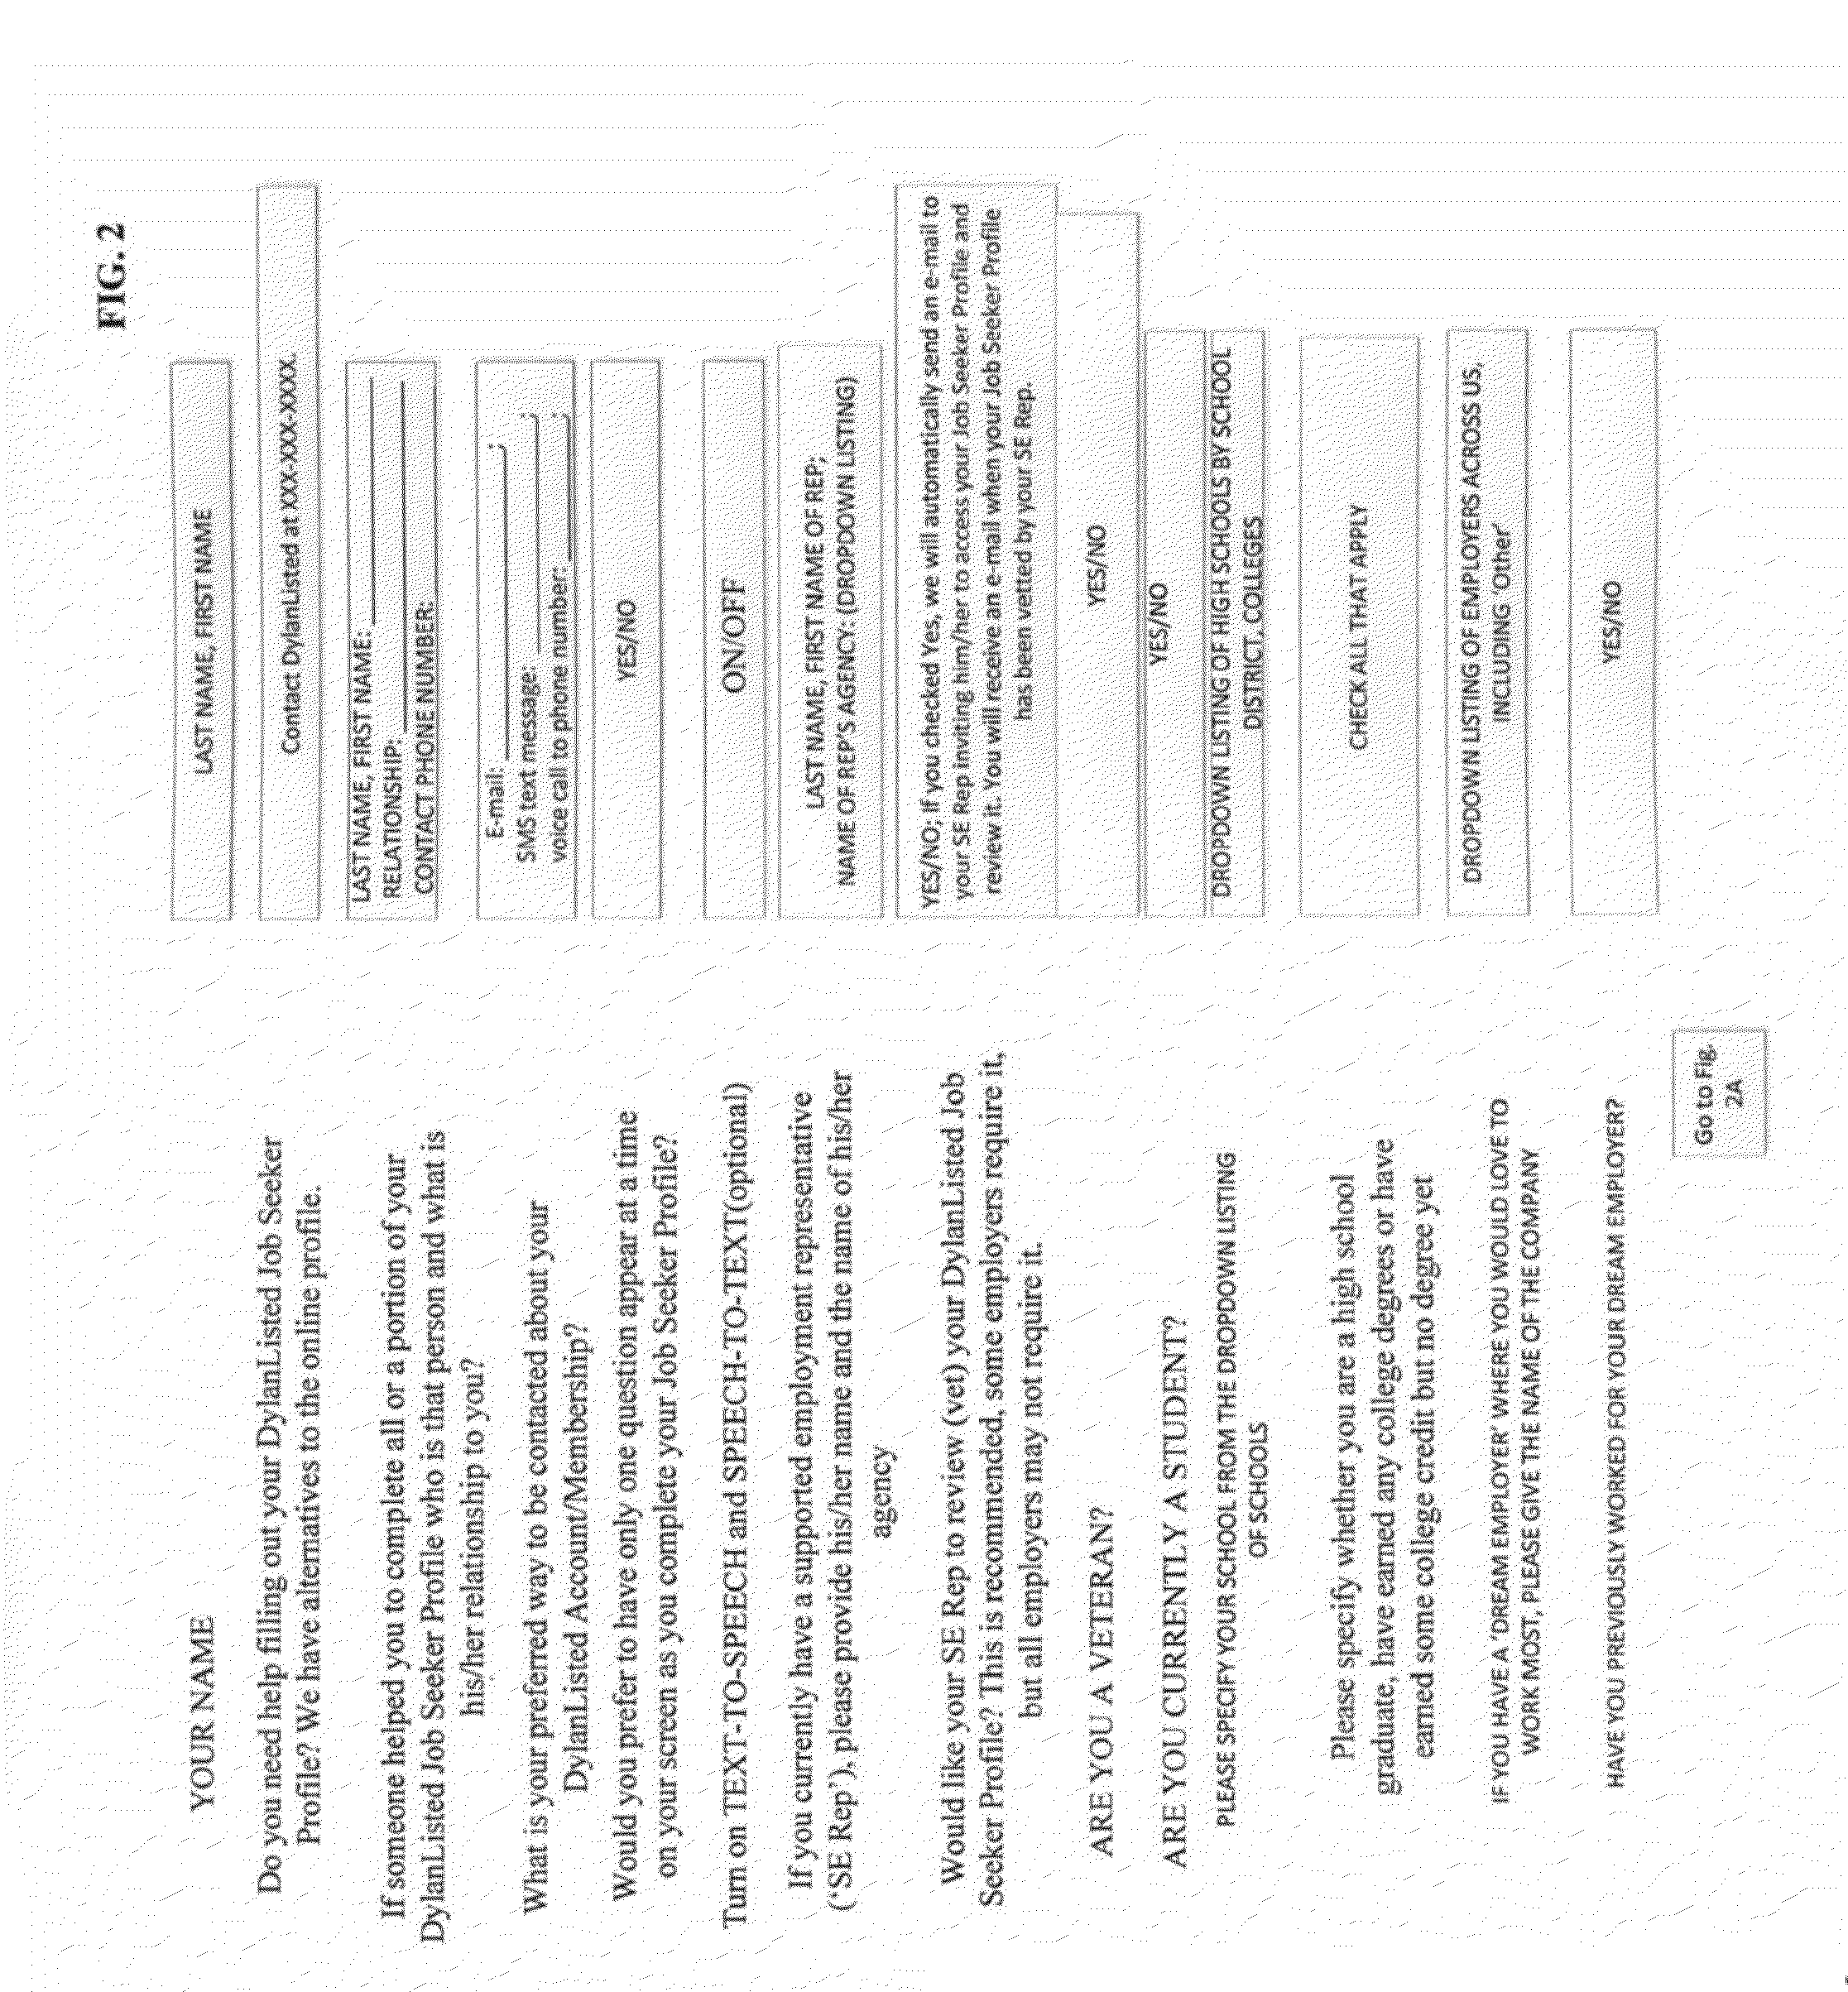 Web-based system, apparatus and method promoting hiring of persons with disabilities who self-identify